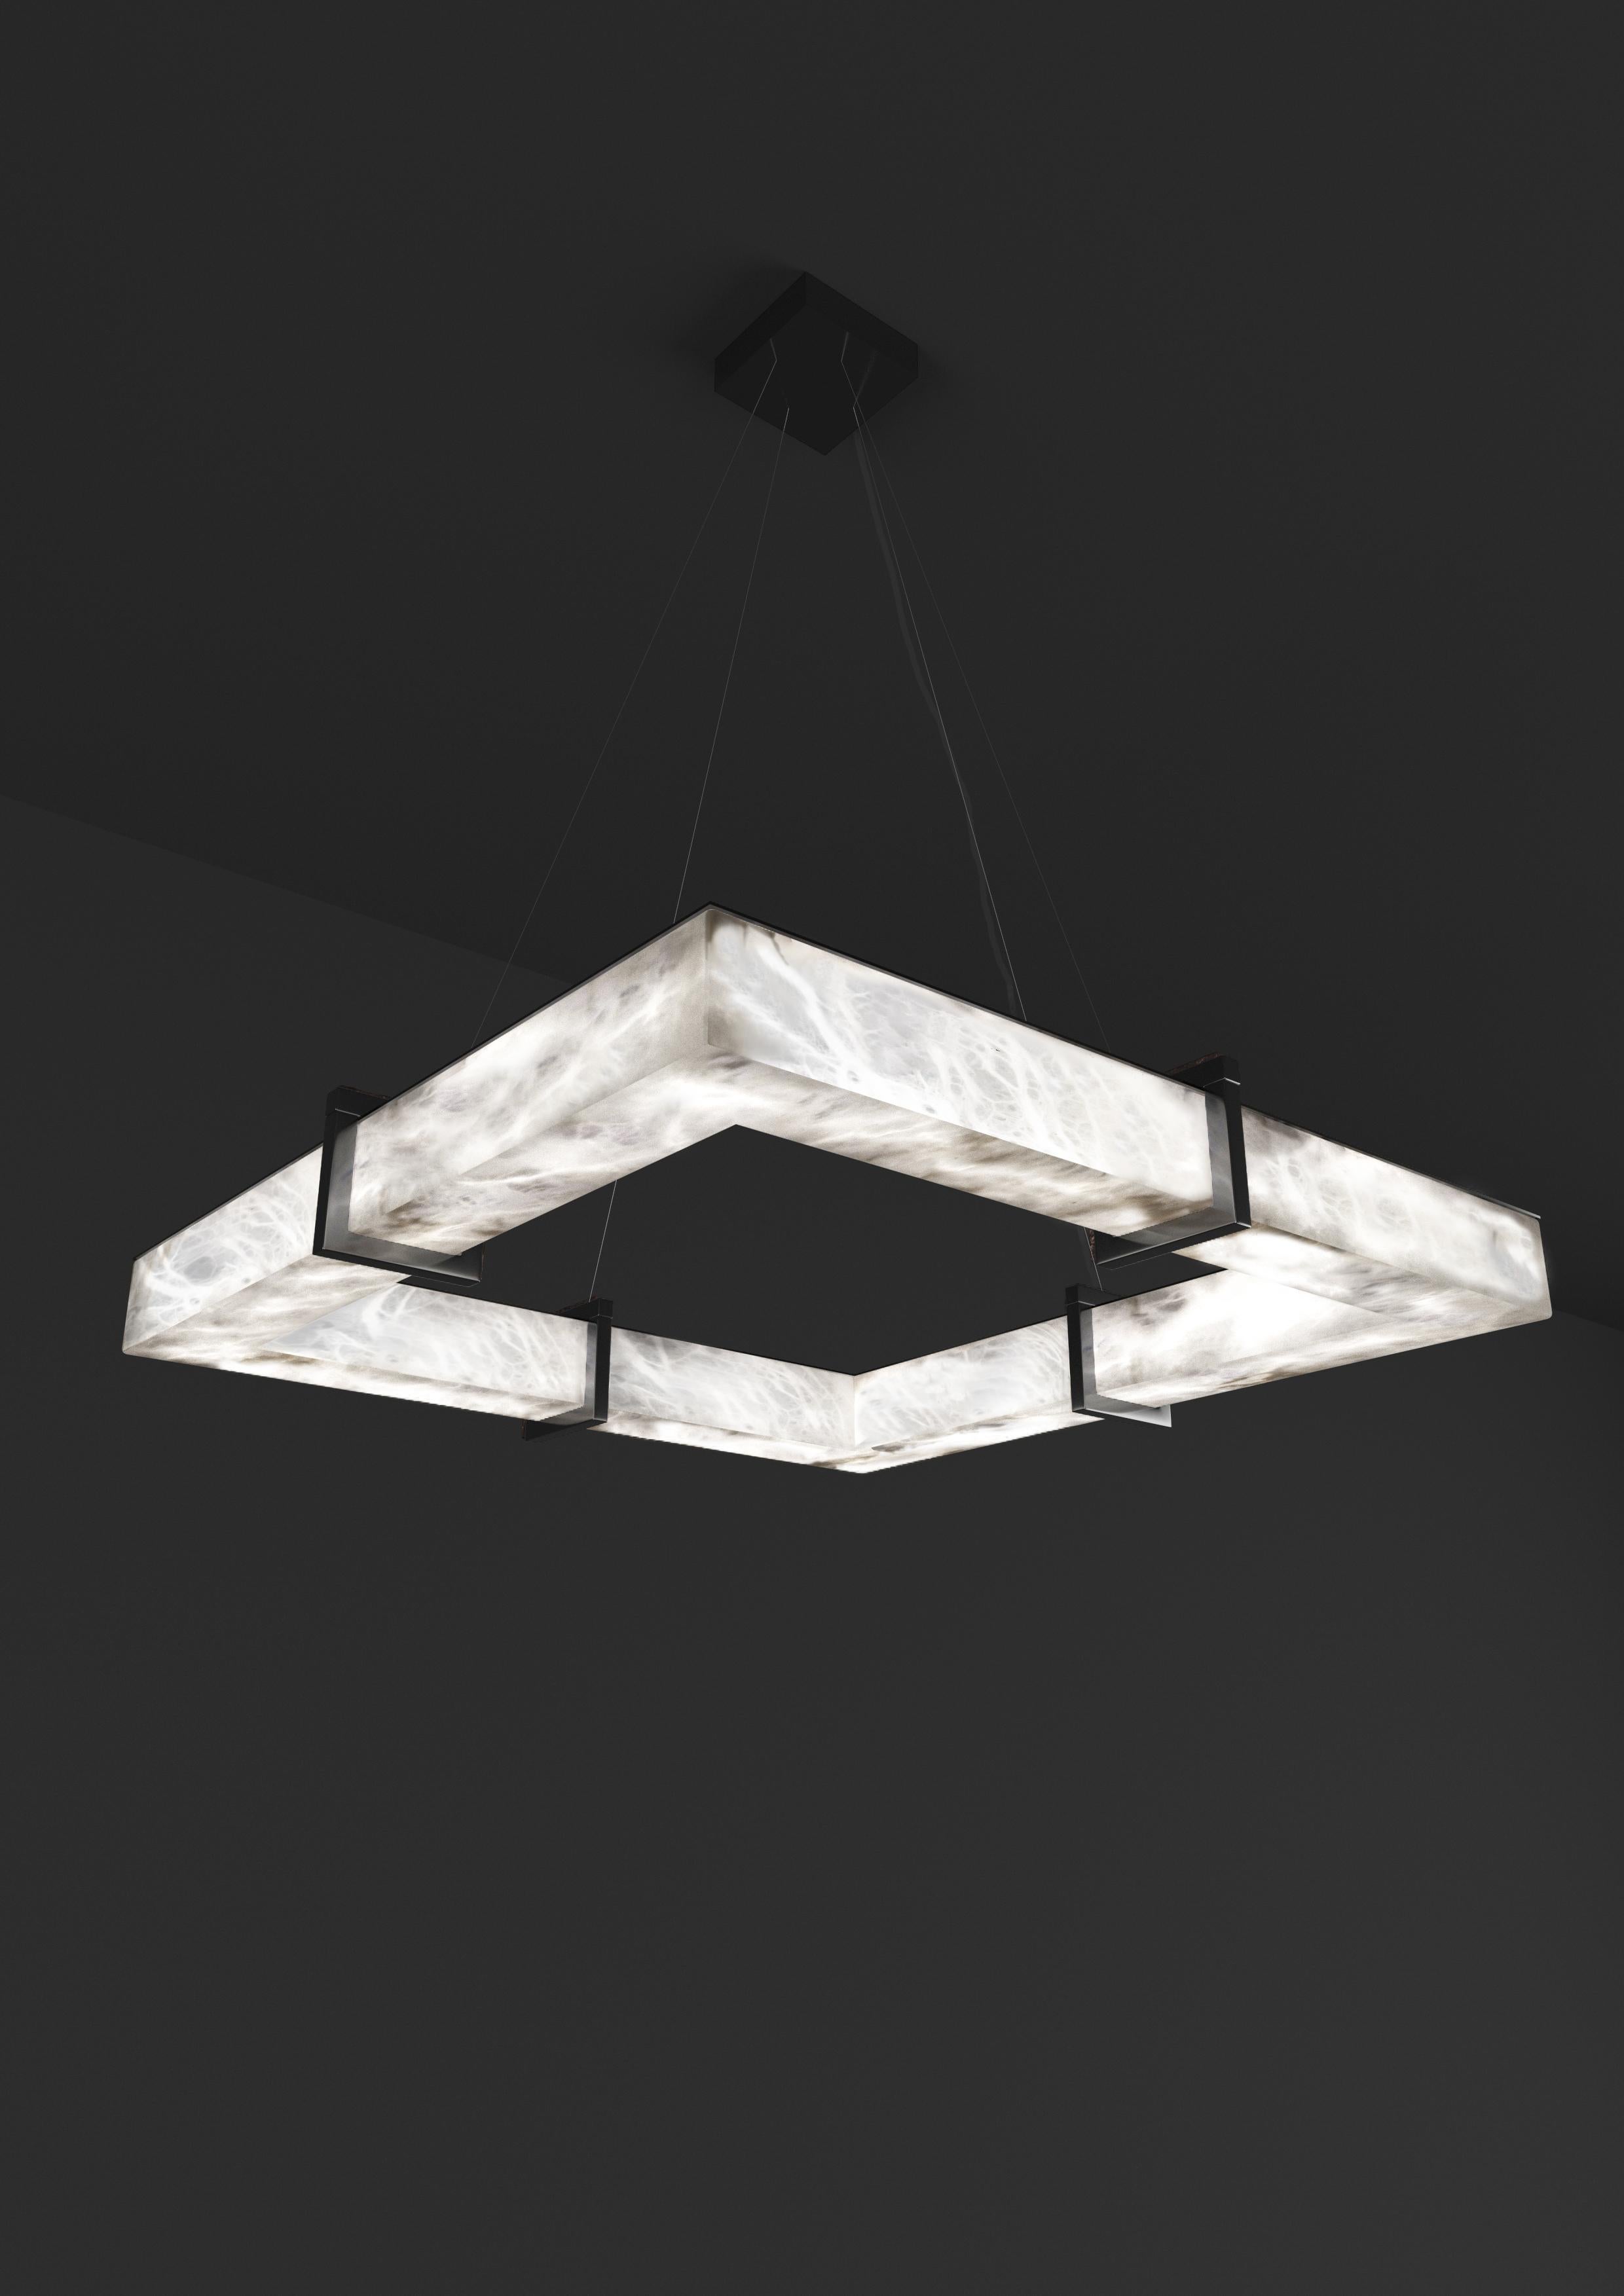 Talassa Shiny Black Metal Pendant Lamp by Alabastro Italiano
Dimensions: D 80 x W 80 x H 11 cm.
Materials: White alabaster and metal.

Available in different finishes: Shiny Silver, Bronze, Brushed Brass, Ruggine of Florence, Brushed Burnished,